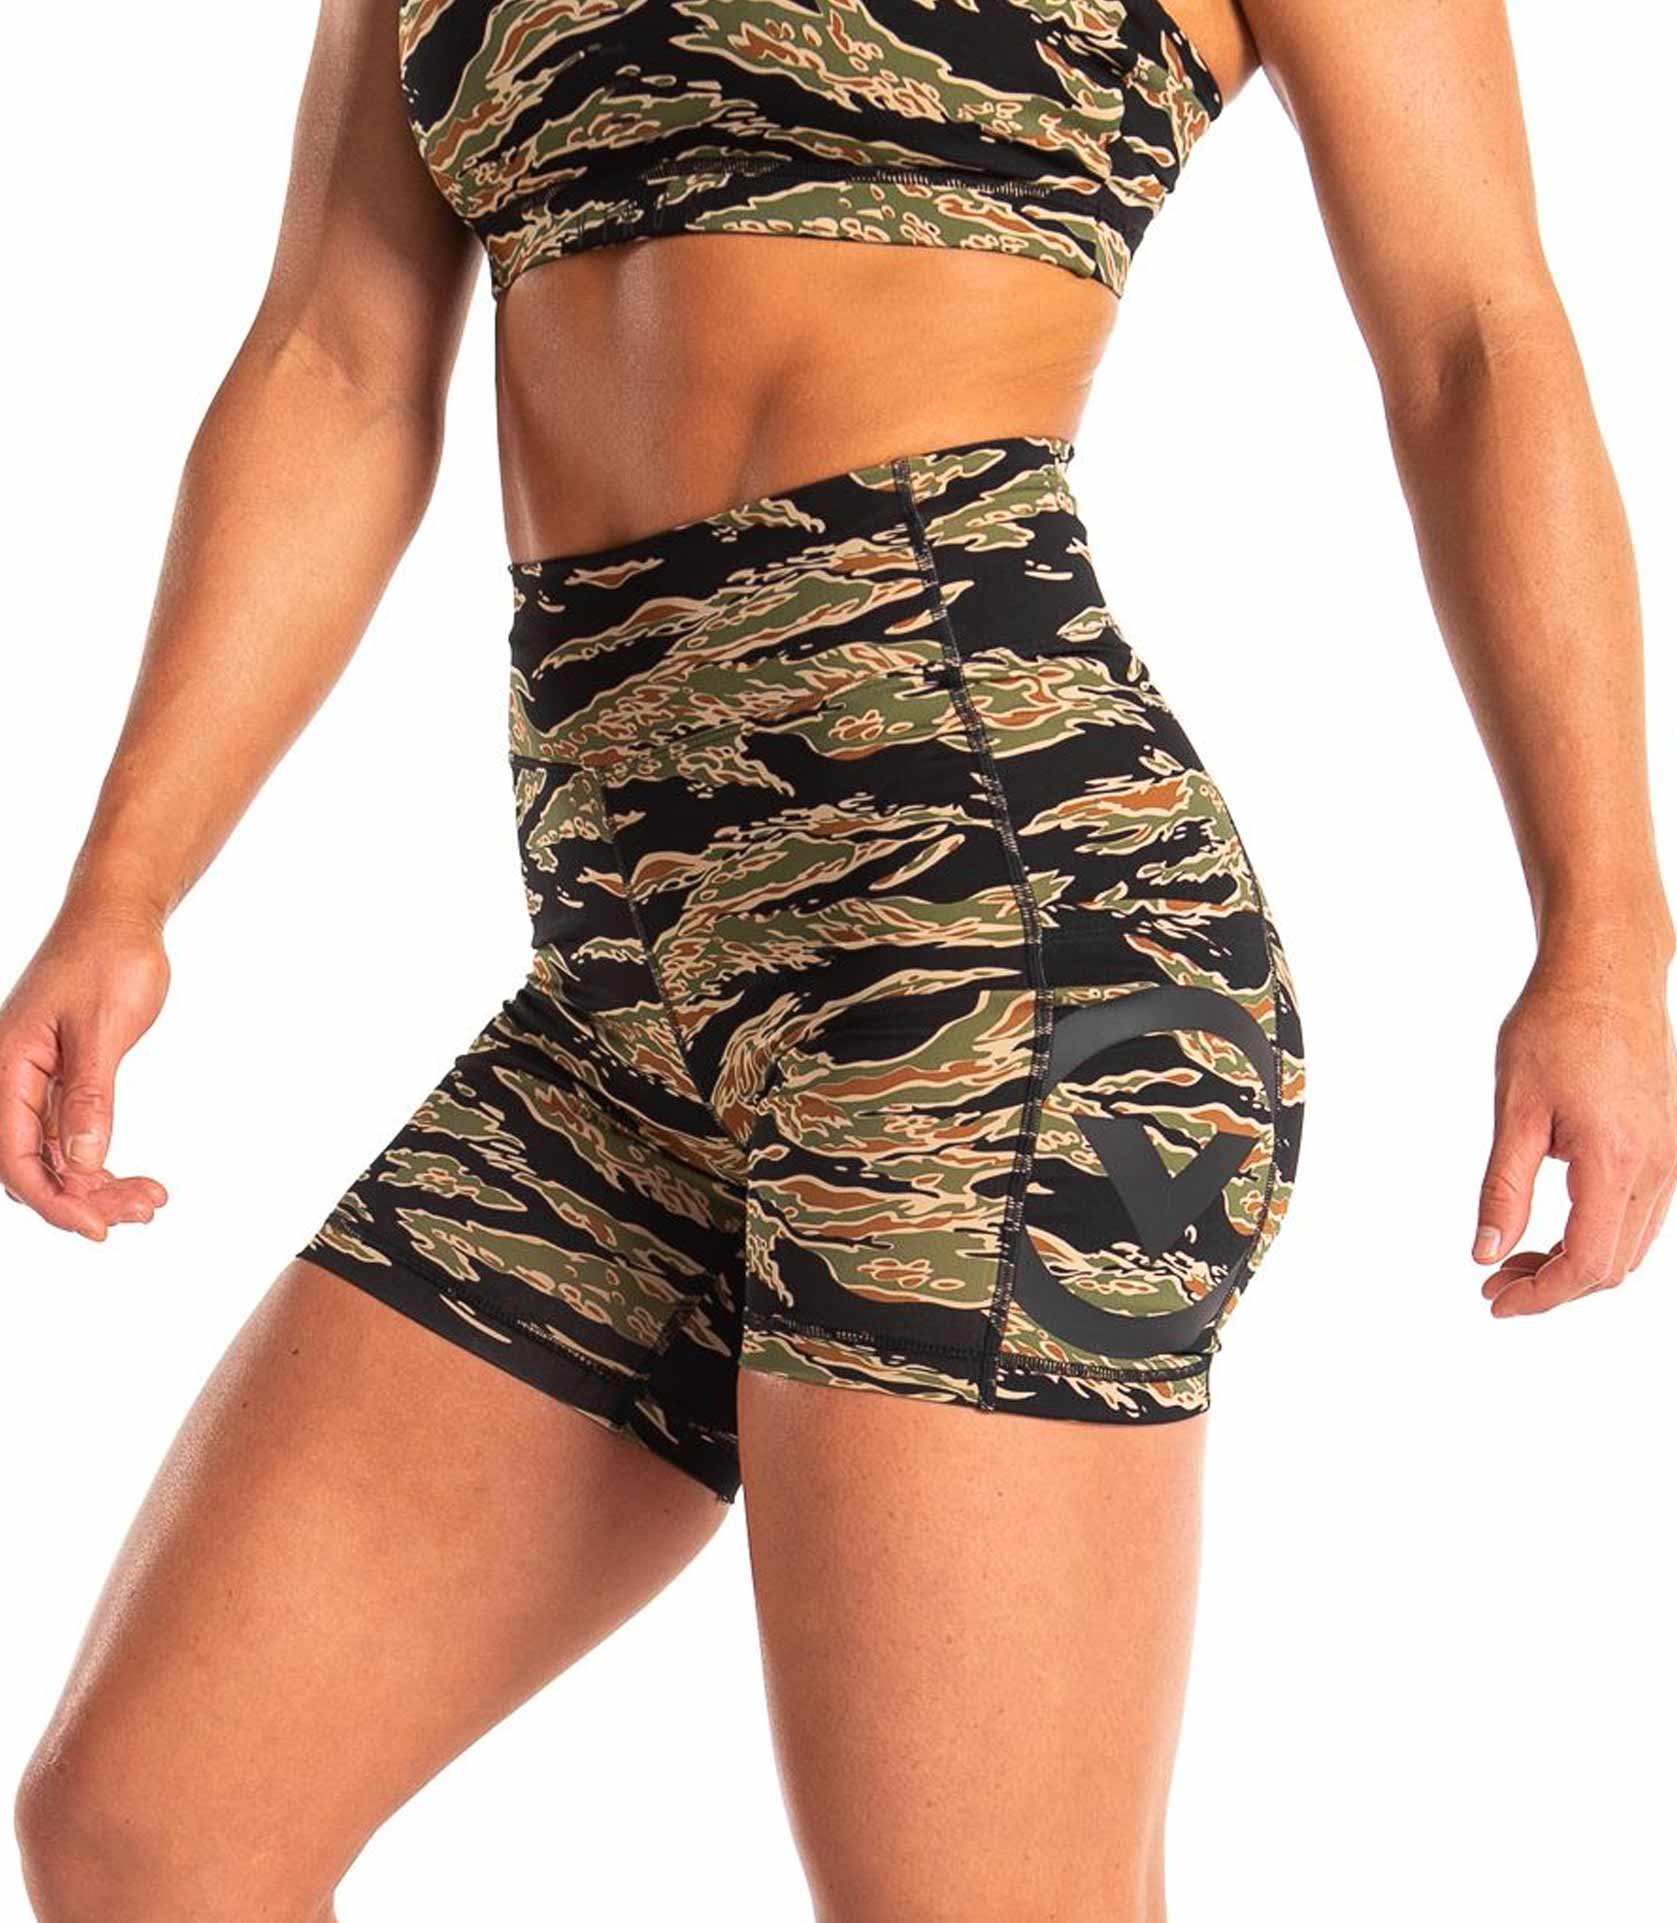 Women's shorts ⇒ Buy the best workout shorts for women